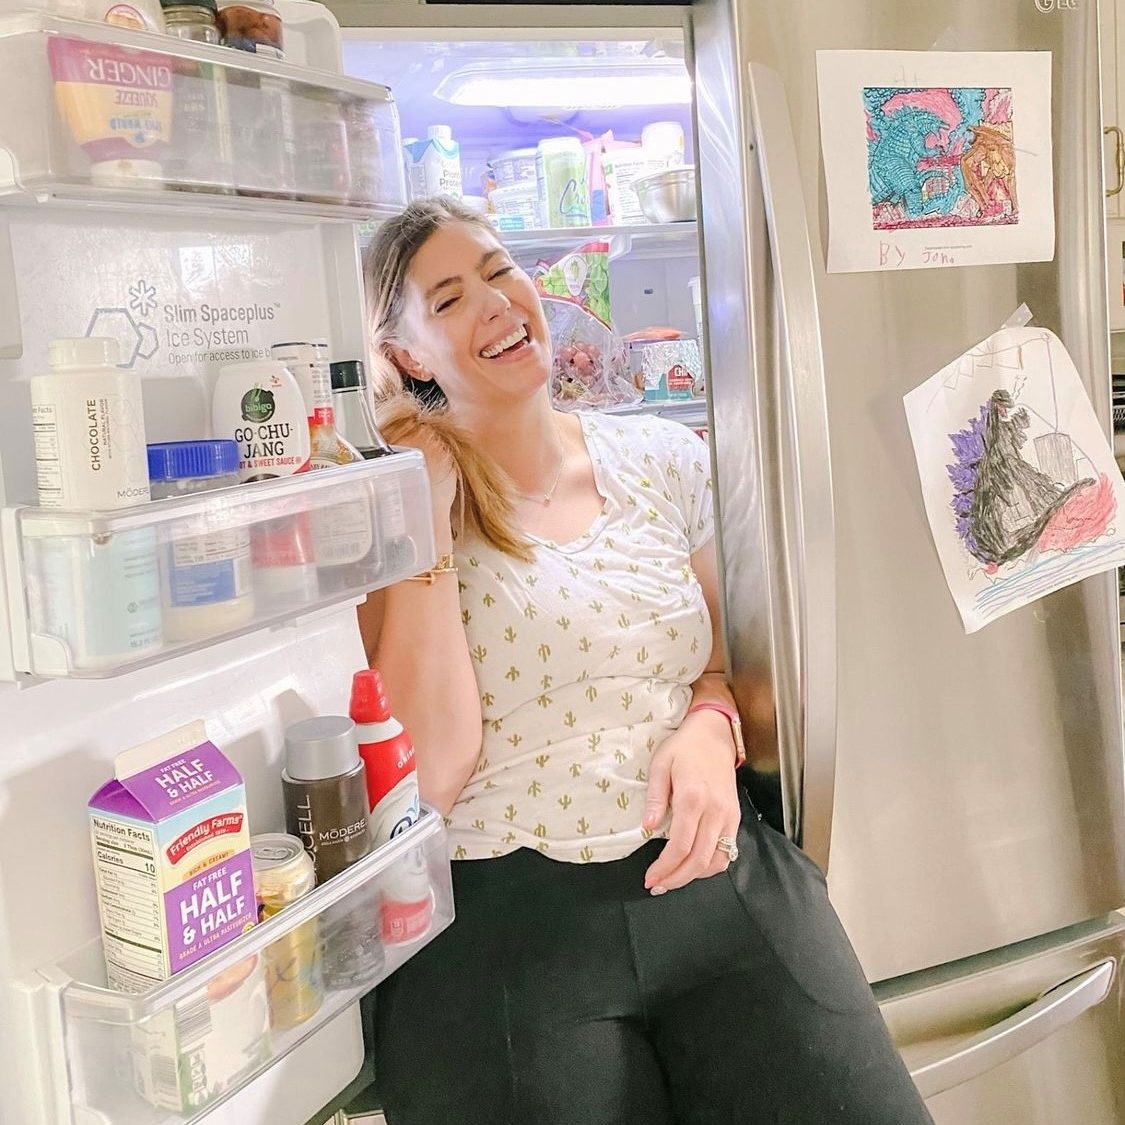 Woman cooling self in refrigerator